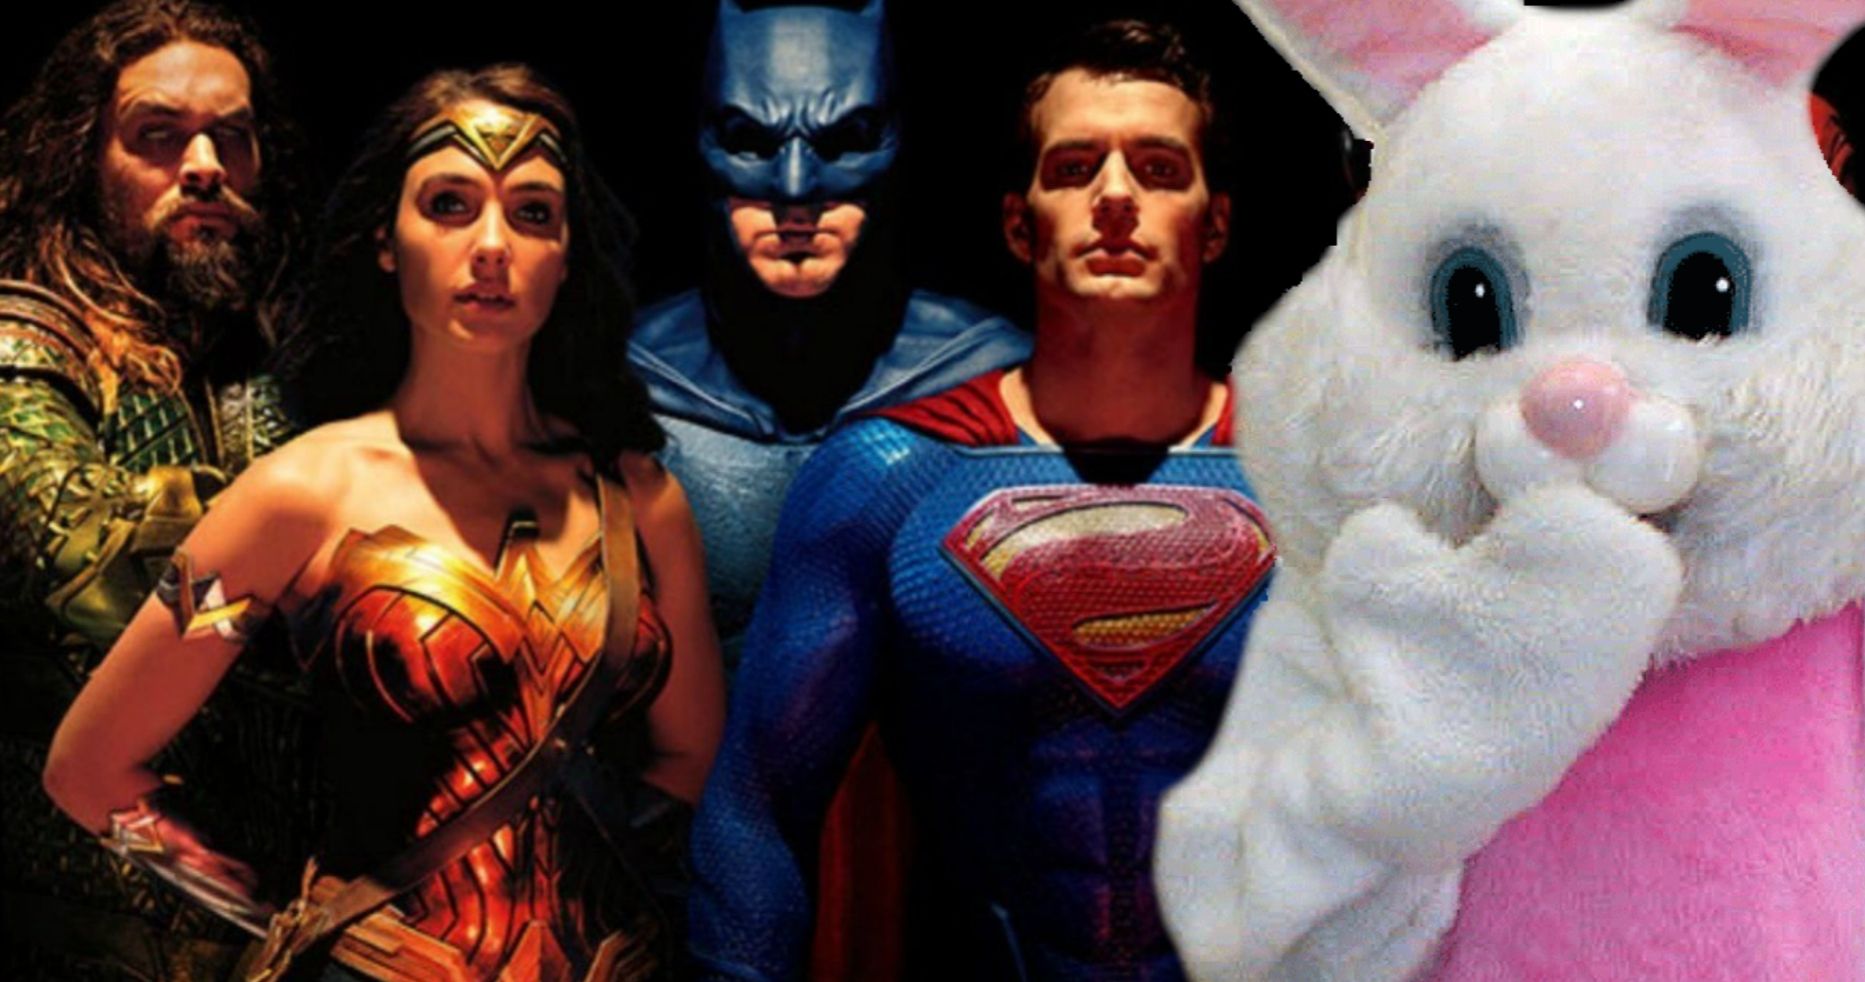 Zack Snyder's Justice League Is Trending on Twitter for Easter Sunday